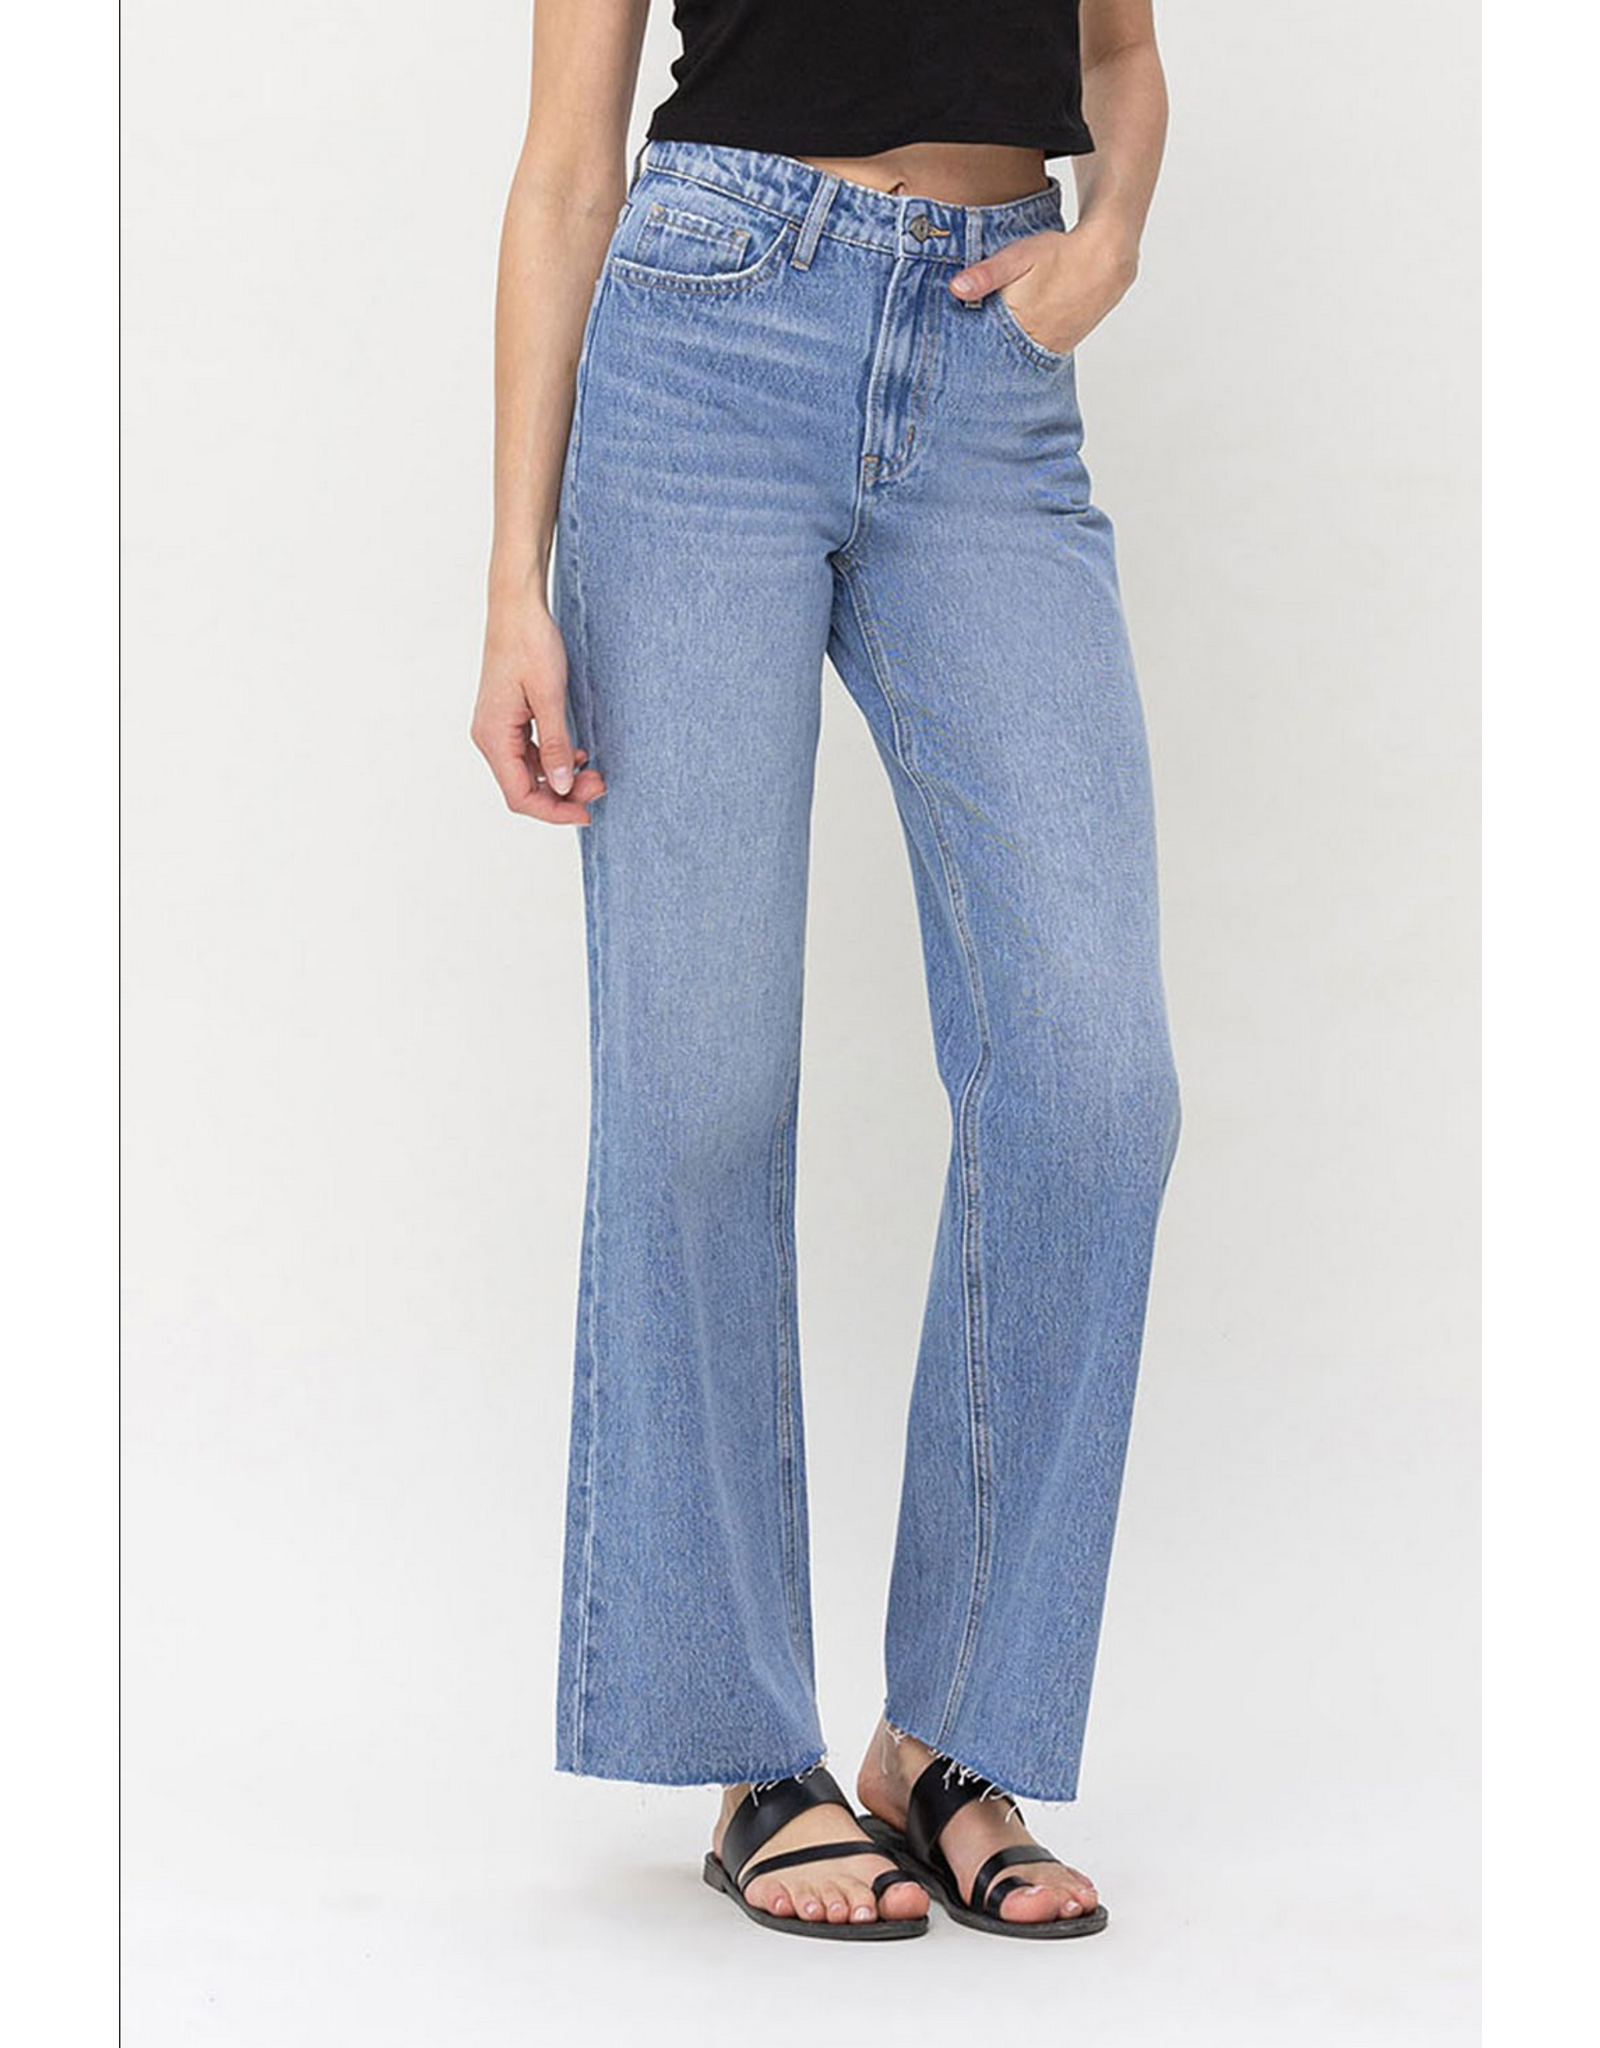 90's Super High Rise Loose Fit Jeans from Vervet by Flying Monkey - J Marcel